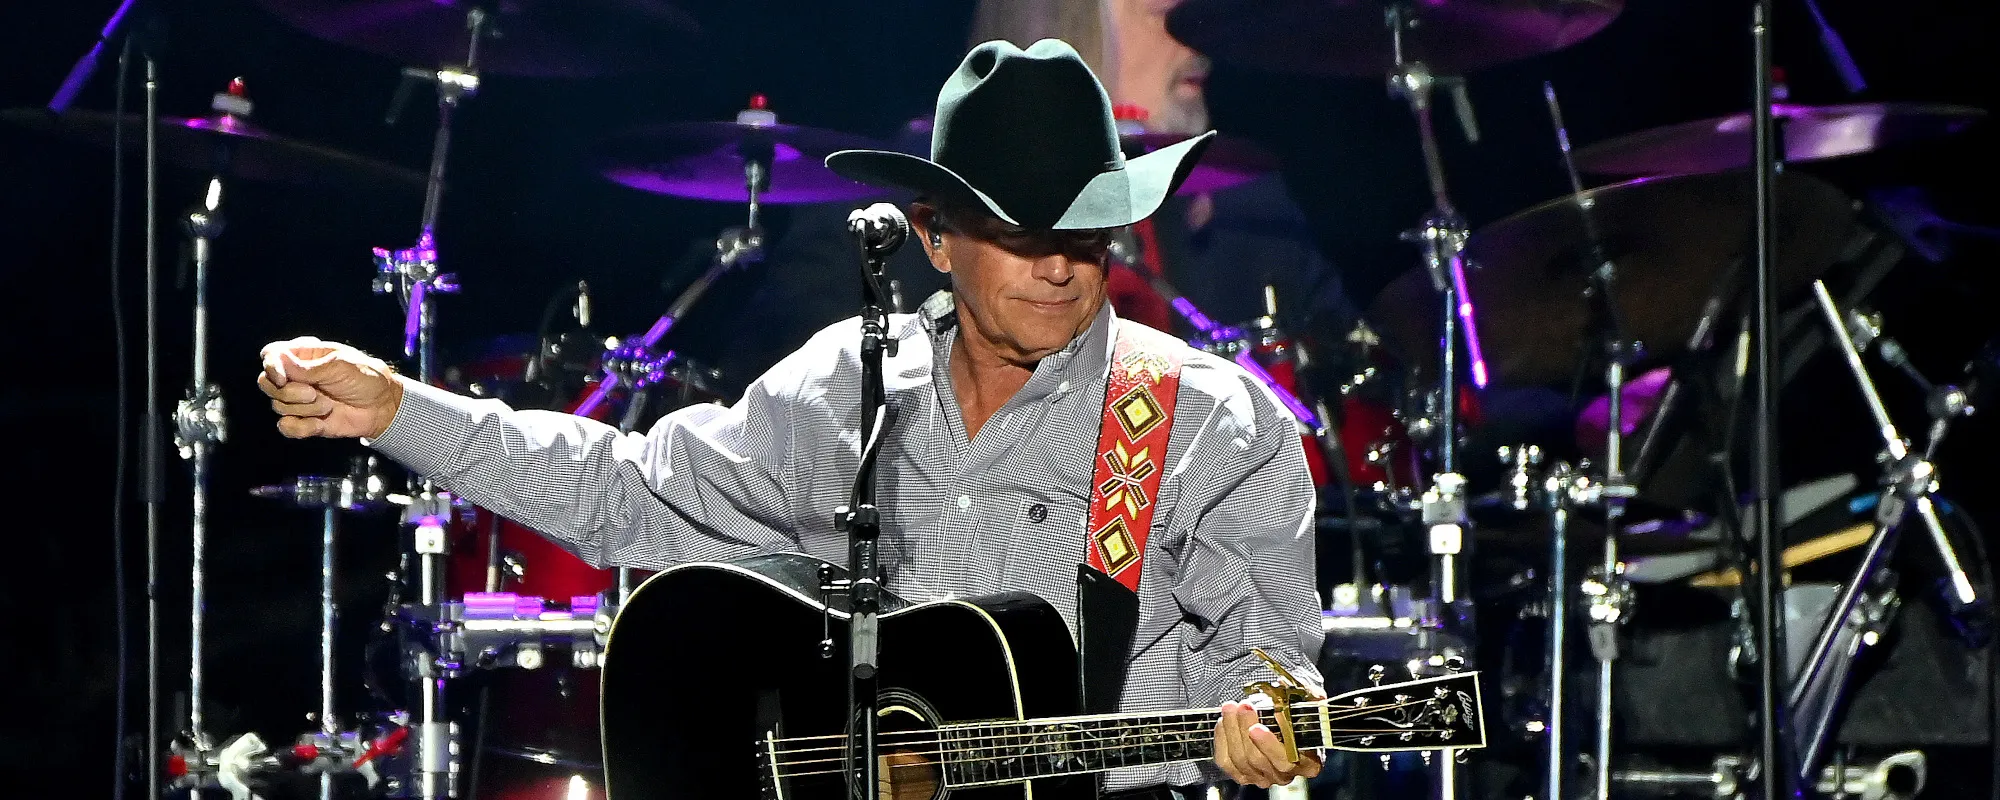 3 Songs You Didn’t Know George Strait Wrote